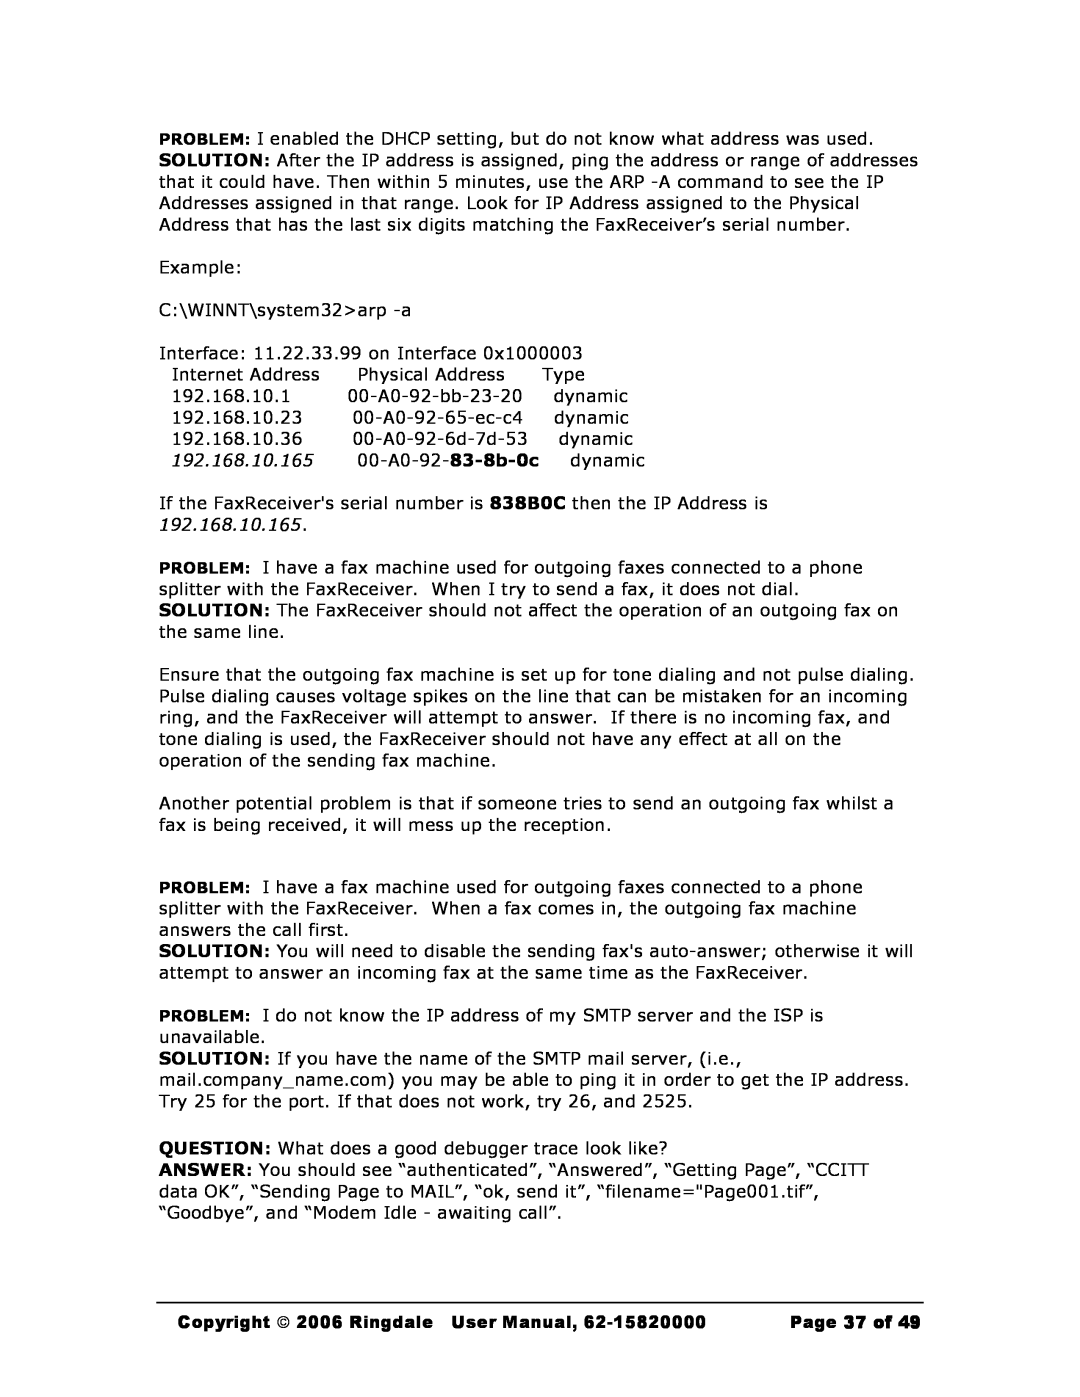 Black Box Black Box Network Services FaxReceiver Example C\WINNT\system32arp -a, Copyright  2006 Ringdale User Manual 